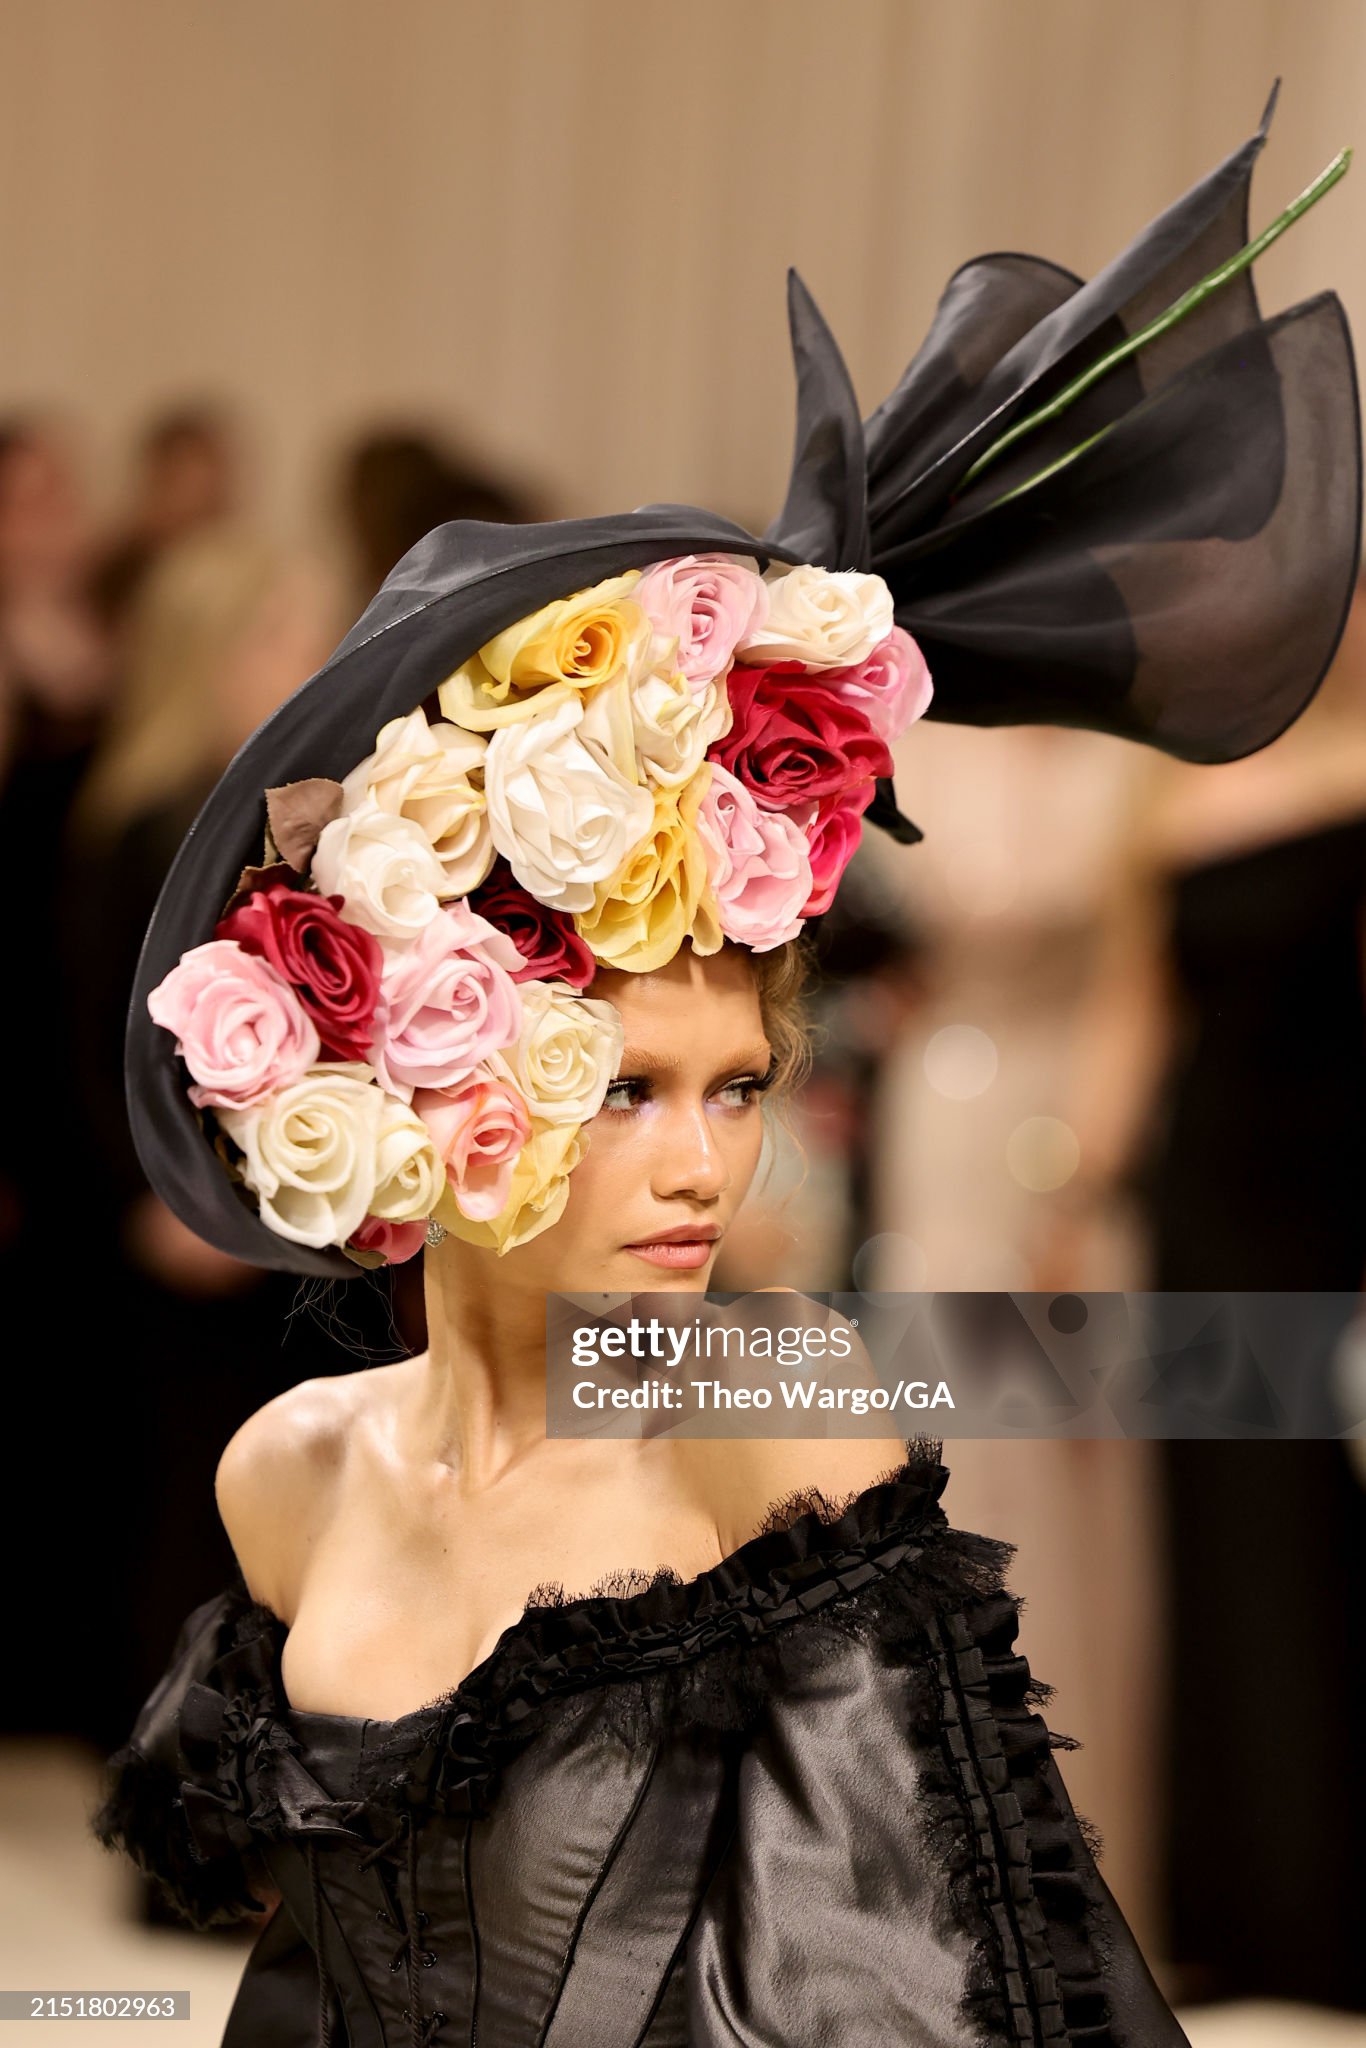 gettyimages-2151802963-2048x2048.jpg